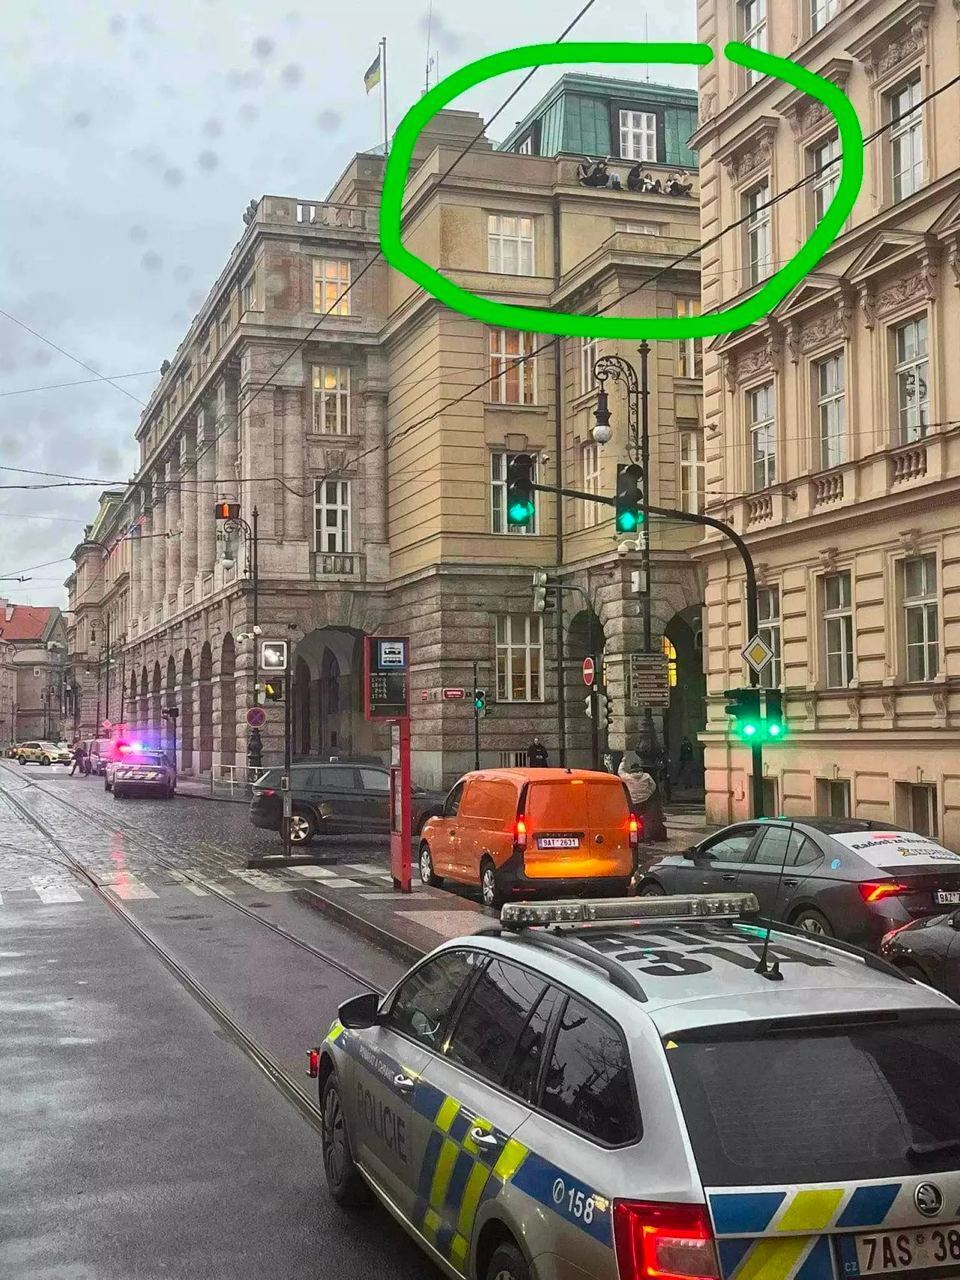 University shooting in Prague: 10 people were killed, attacker killed himself. All details